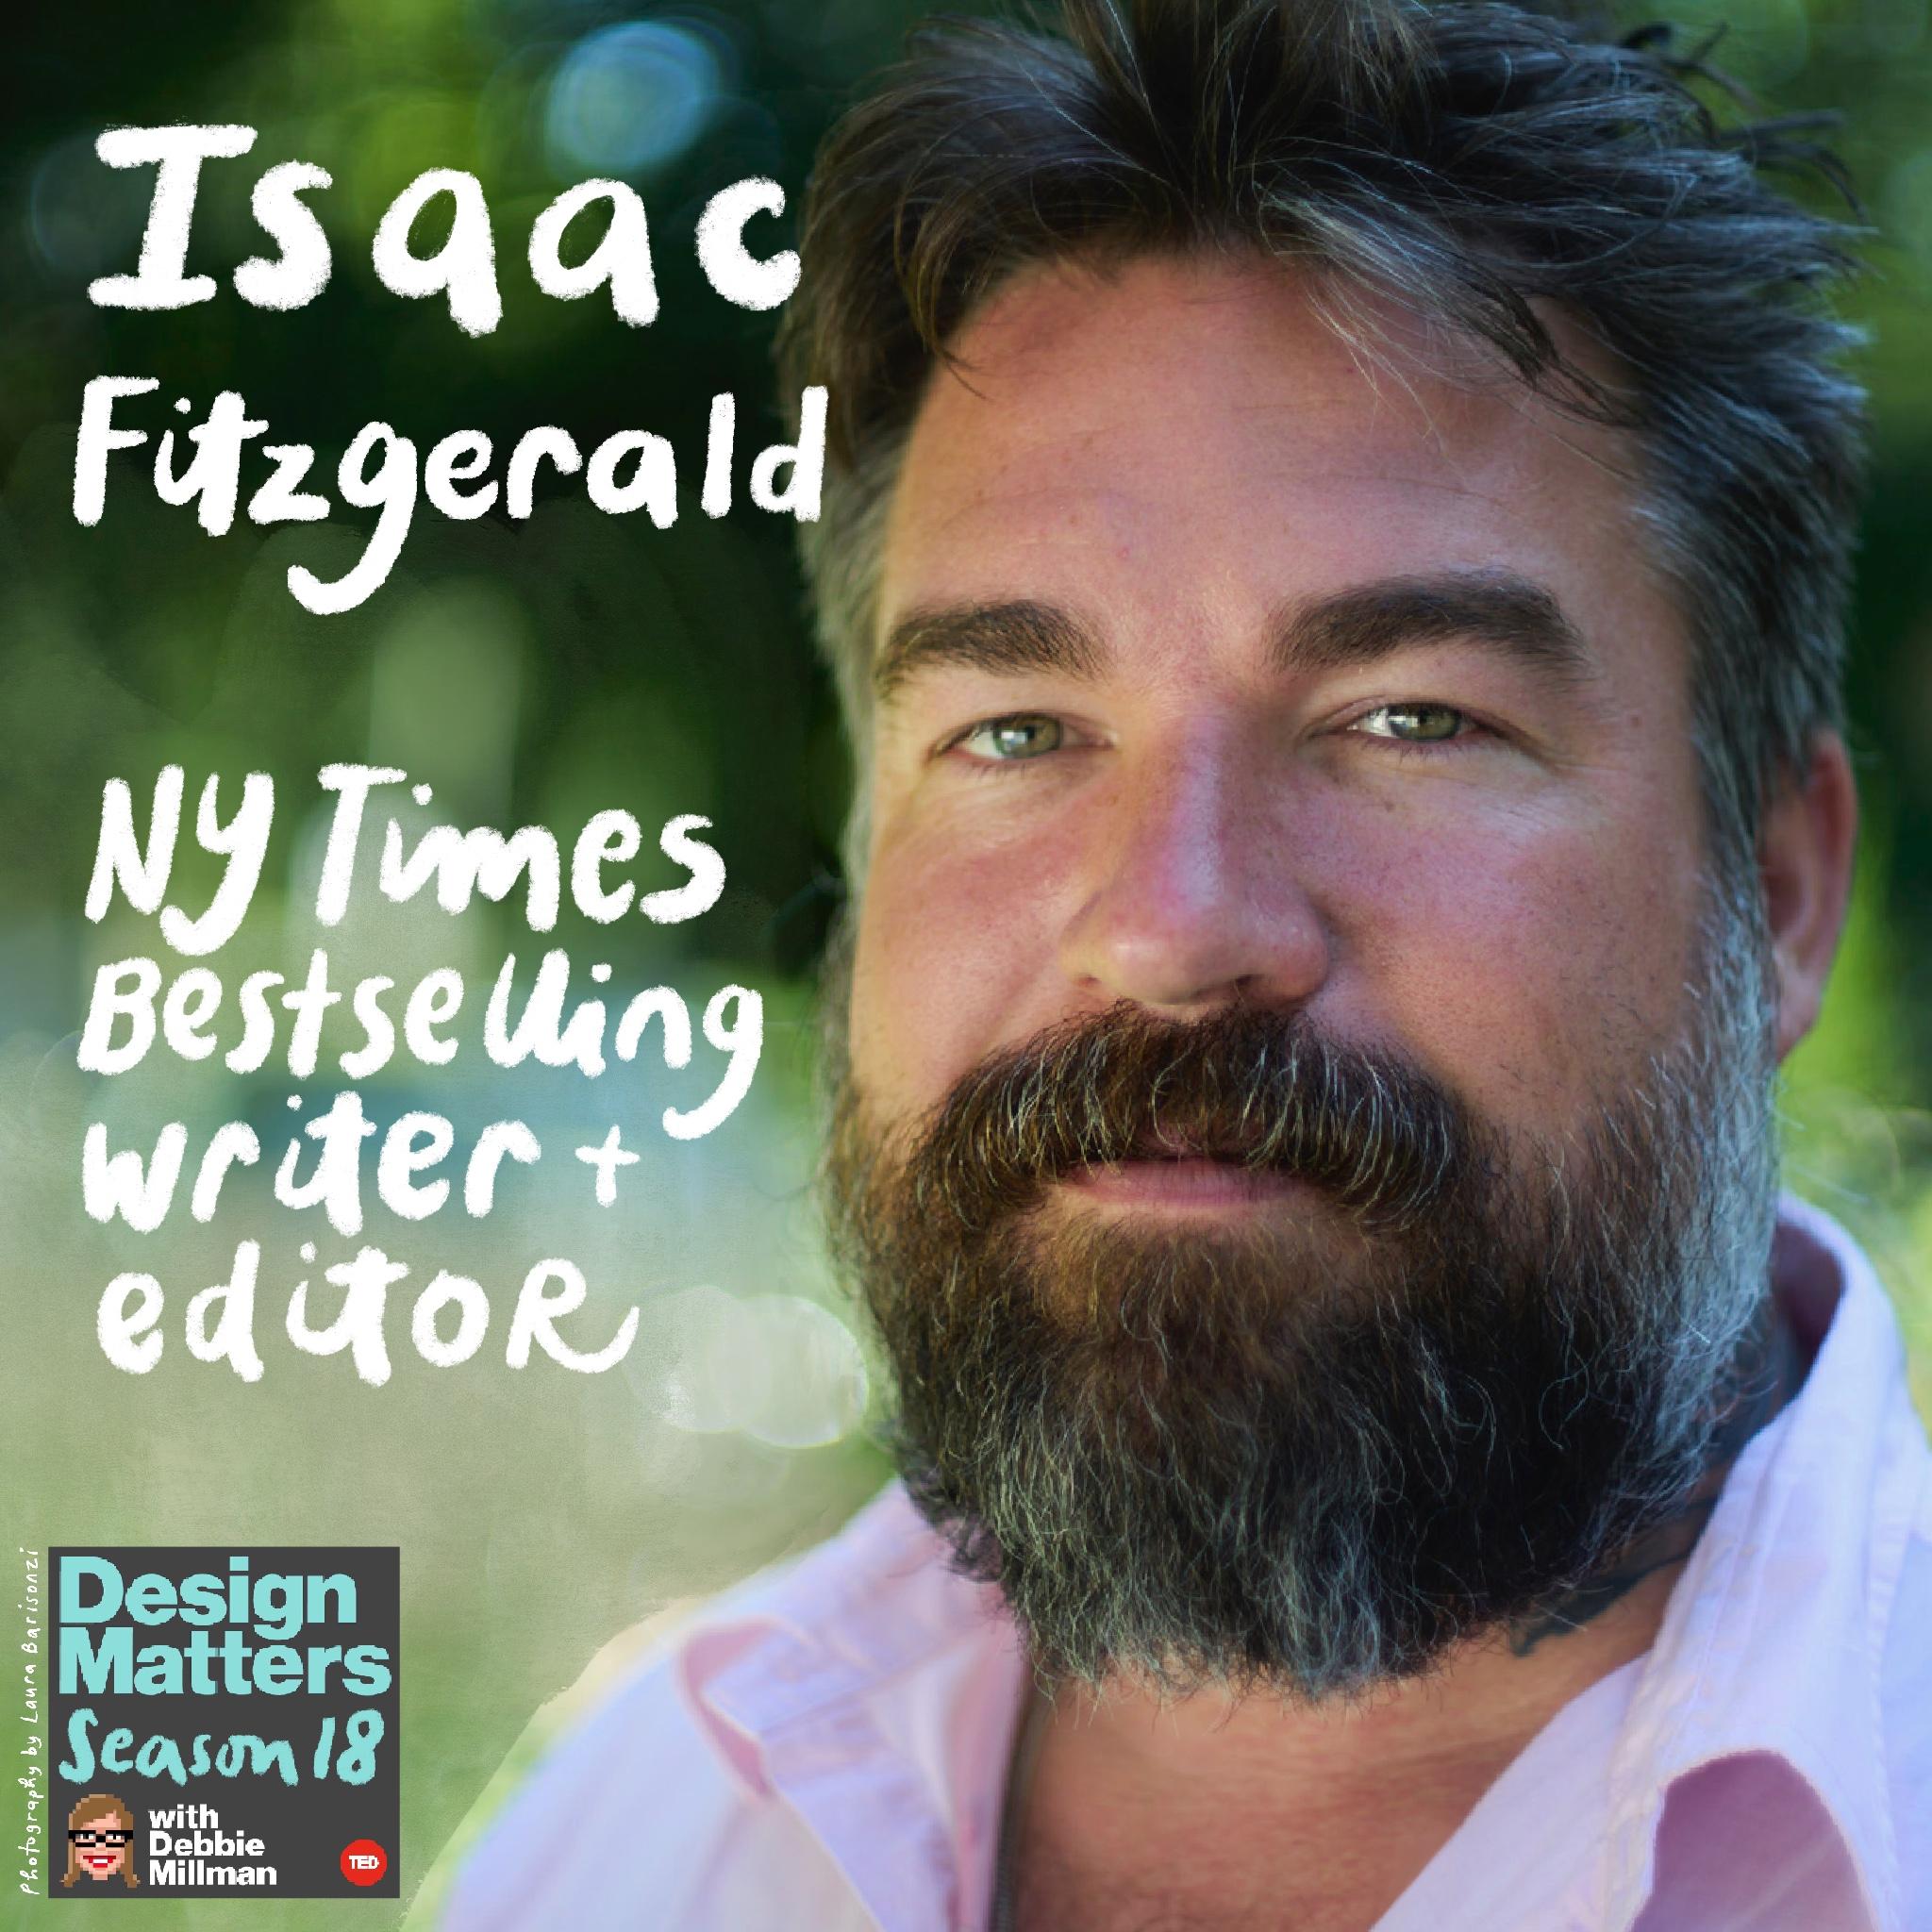 Thumbnail for "Best of Design Matters: Isaac Fitzgerald".